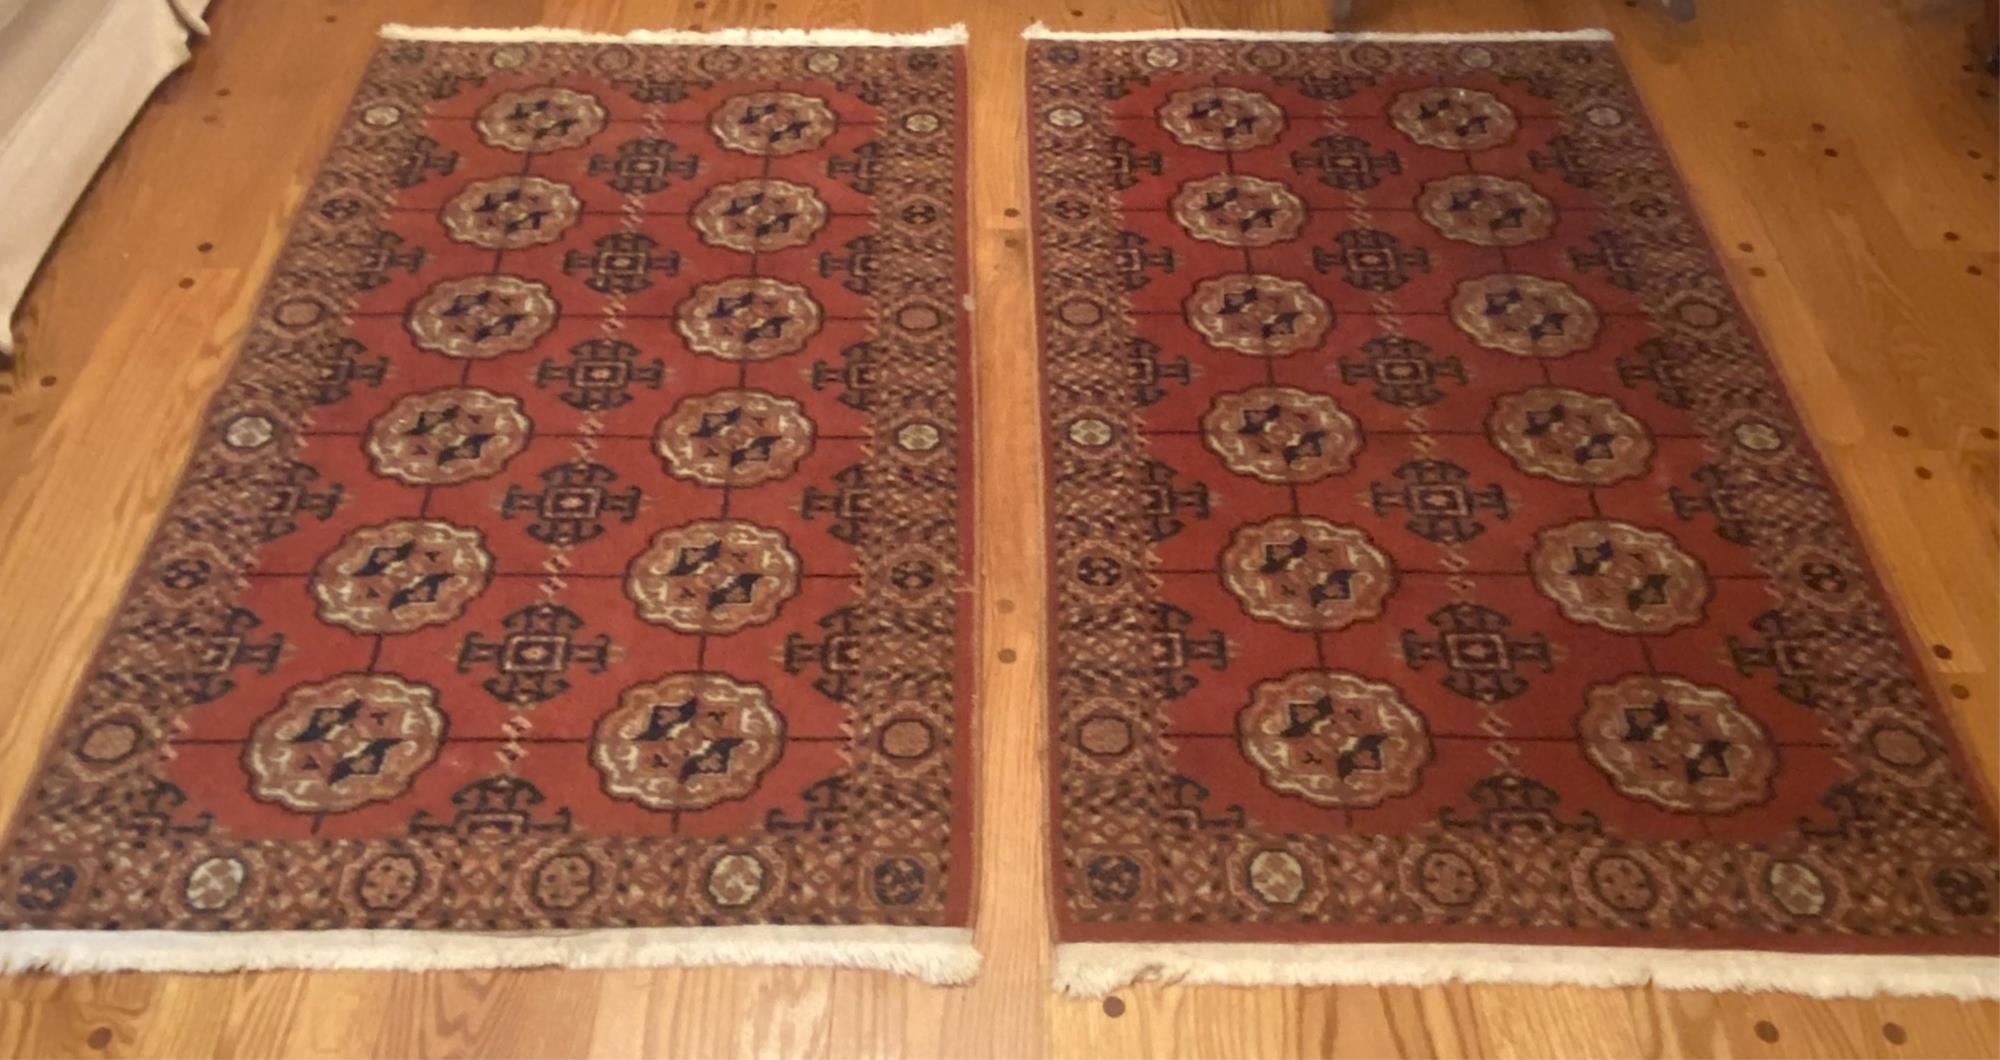 PAIR OF MATCHED AREA ORIENTAL STYLE RUGS